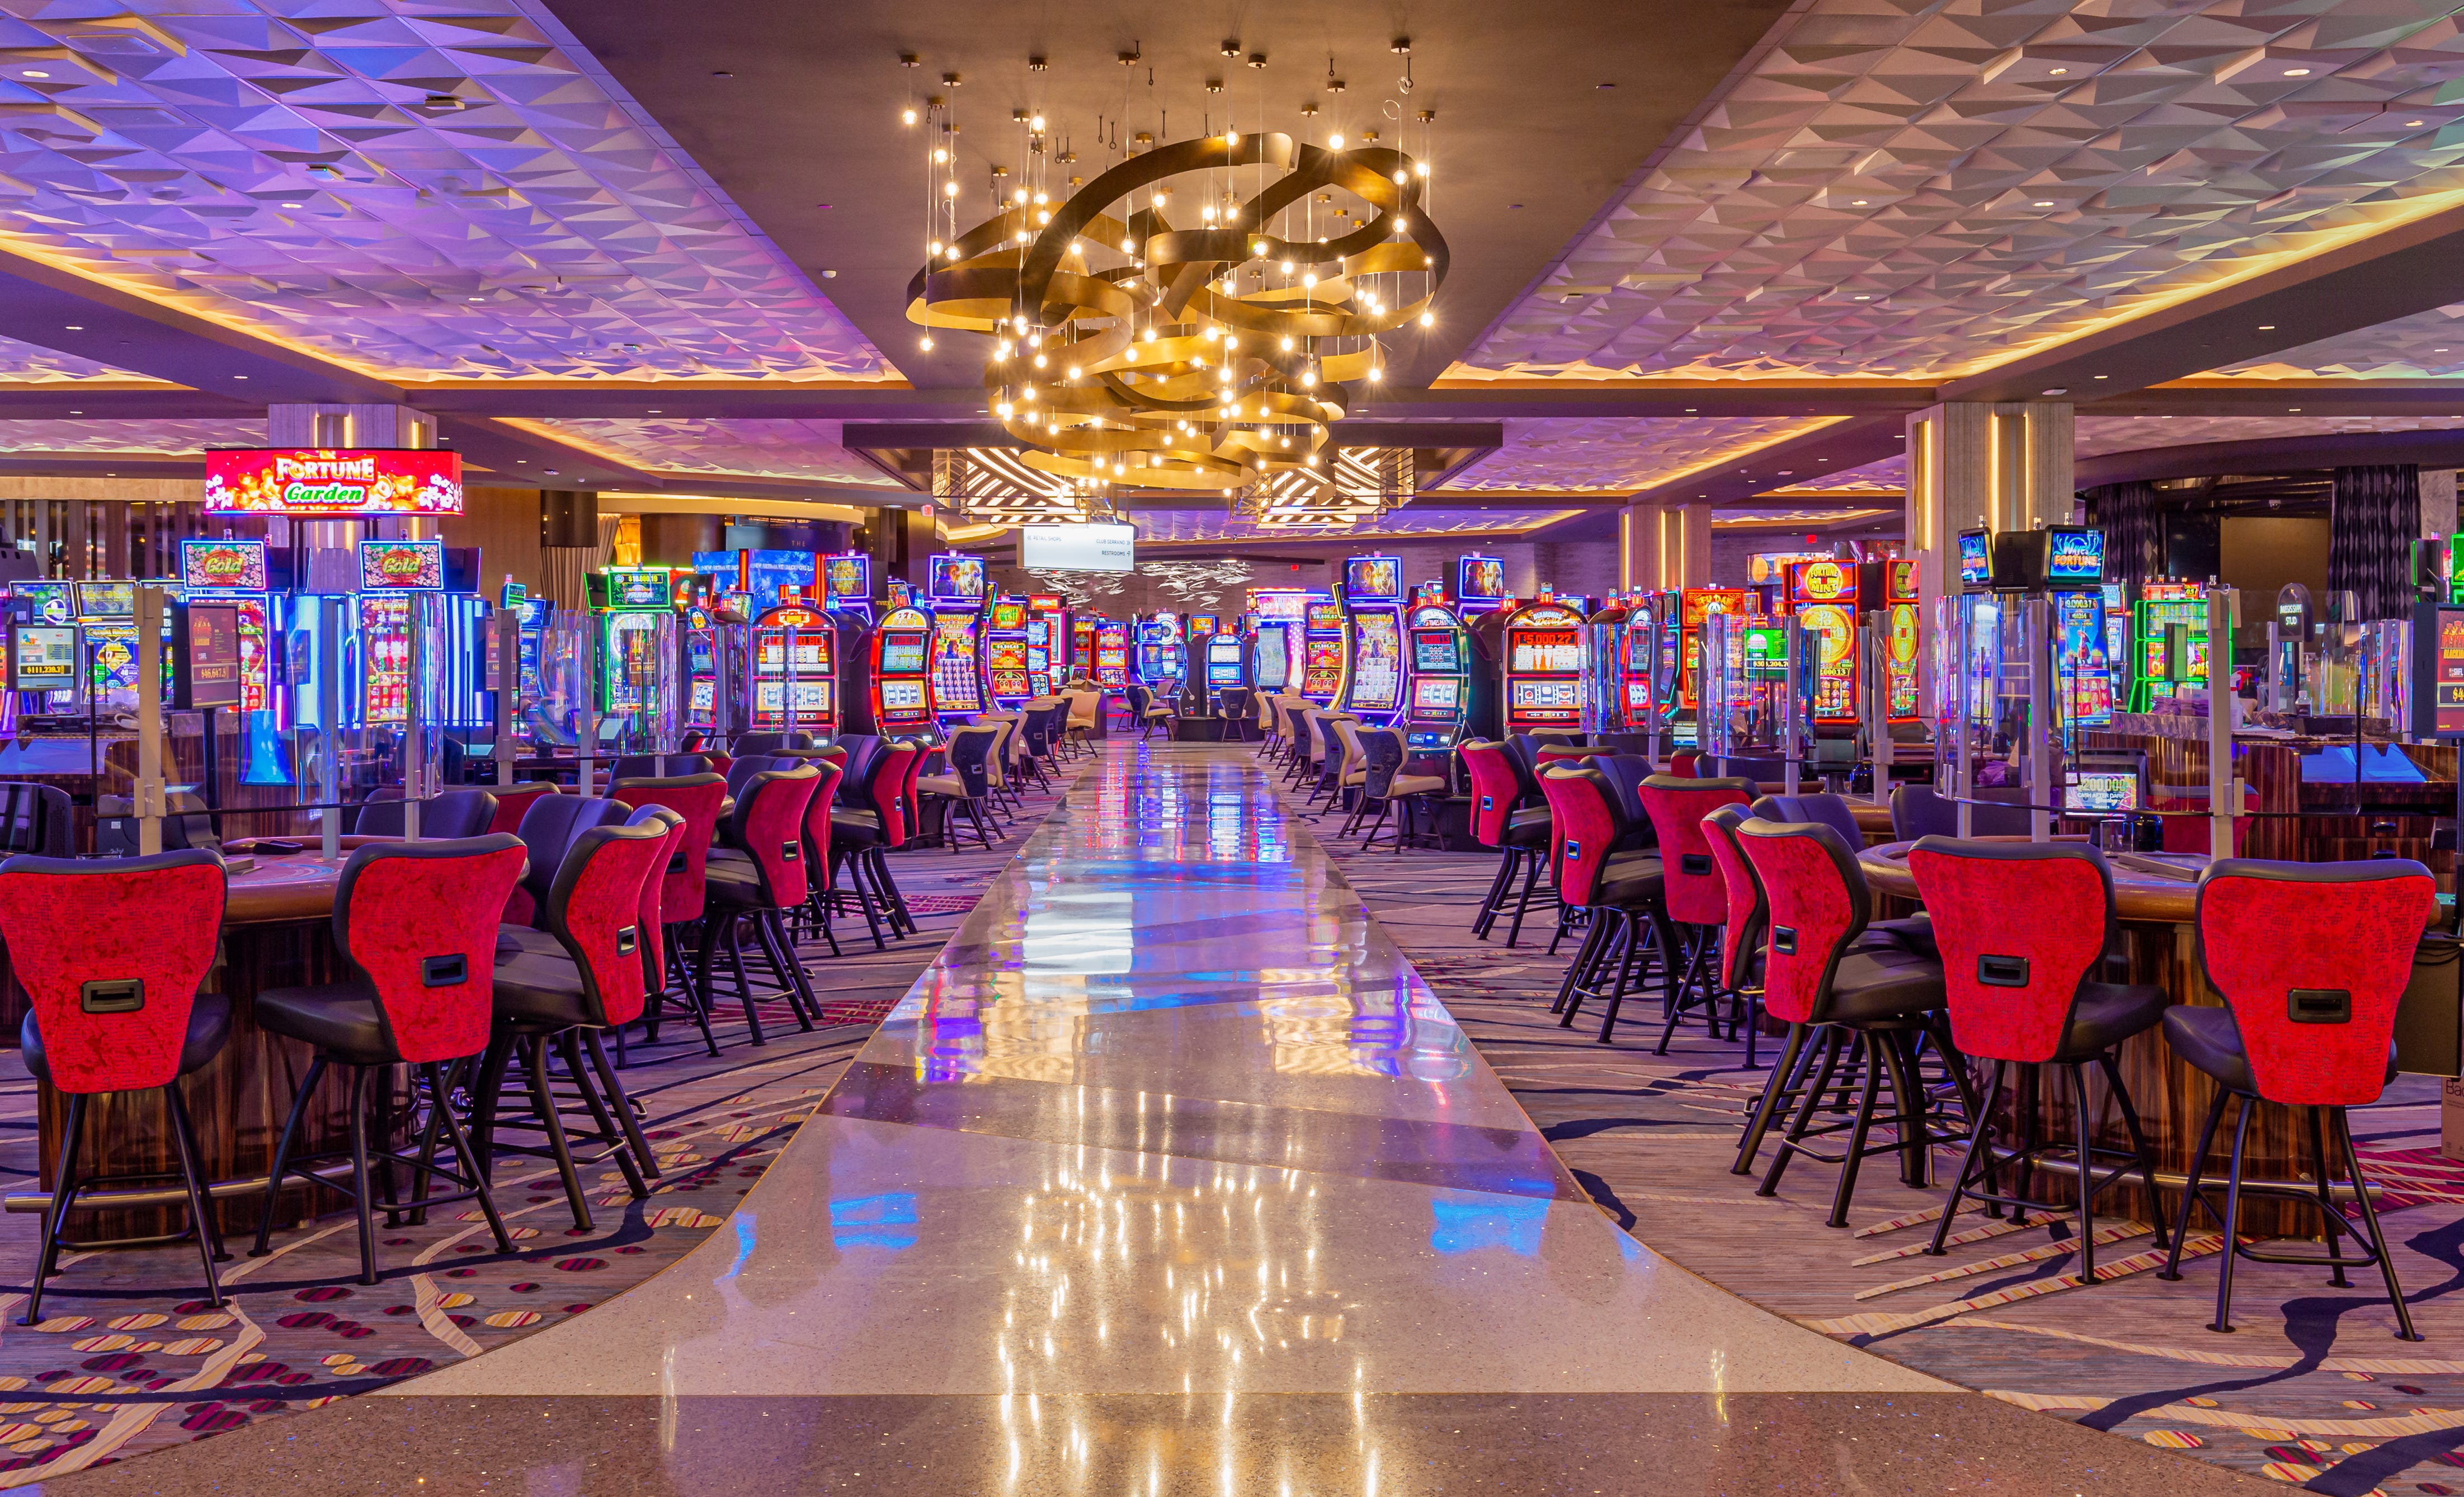 San Manuel Casino to open new bars, gaming this weekend